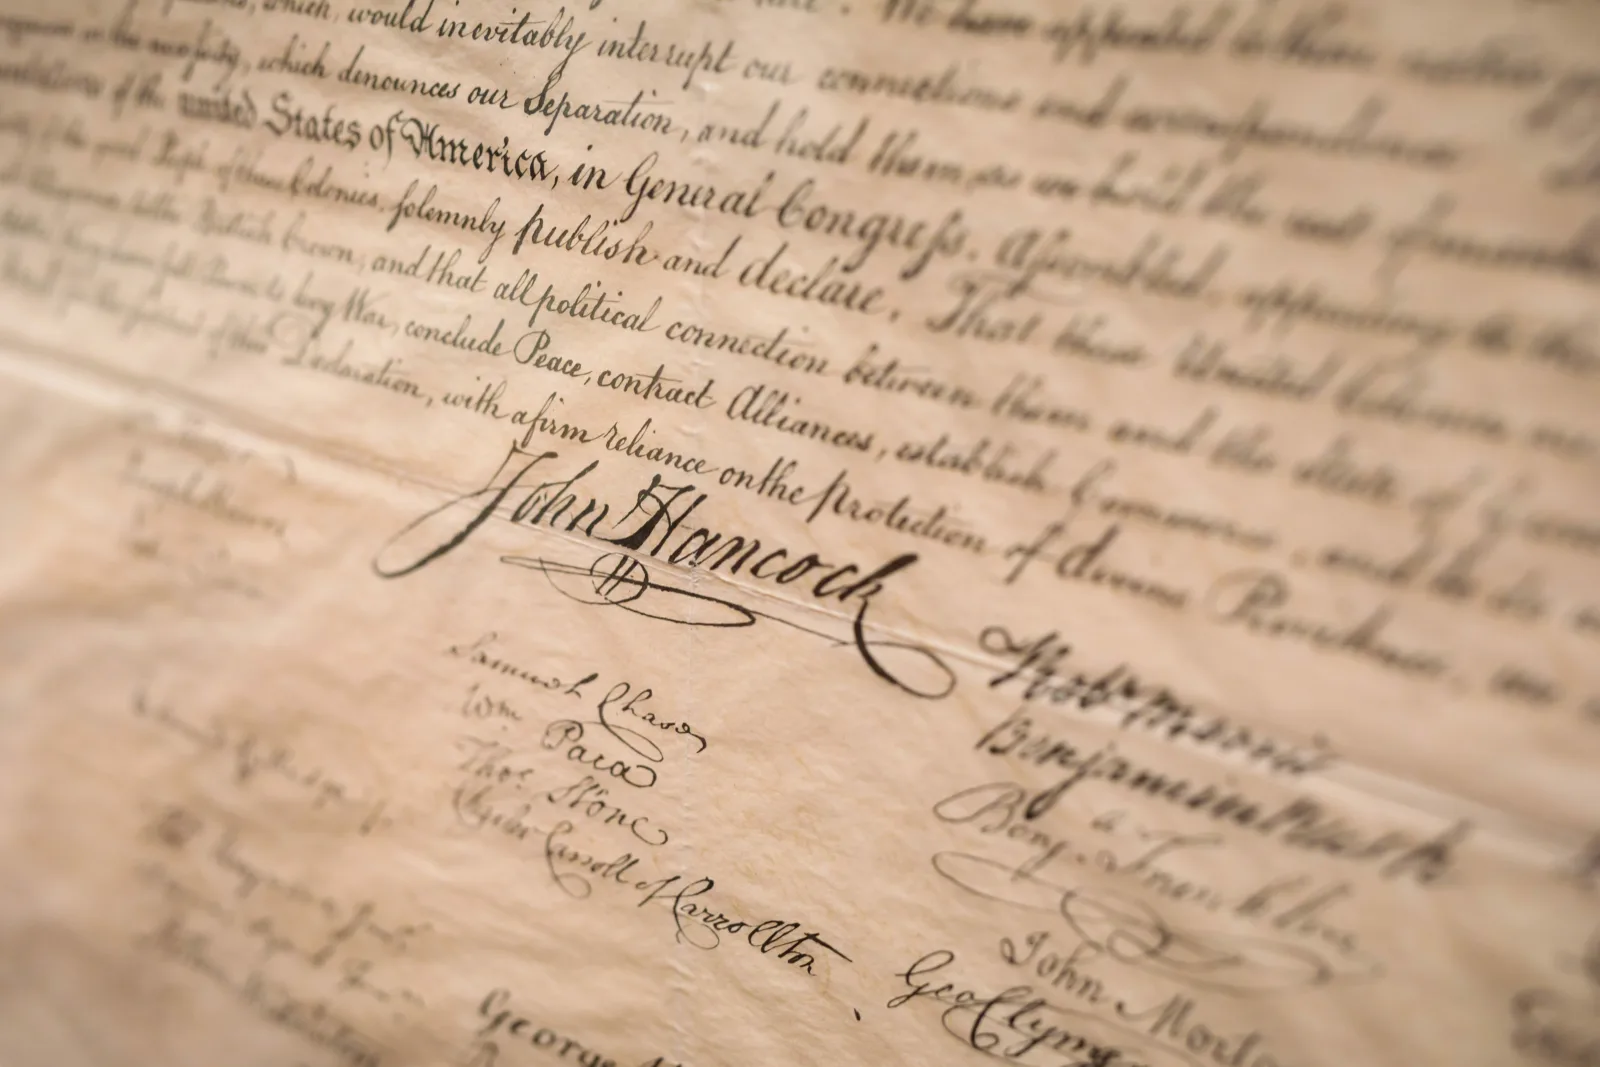 : John Hancock’s iconic signature appears below the text of the Declaration of Independence.